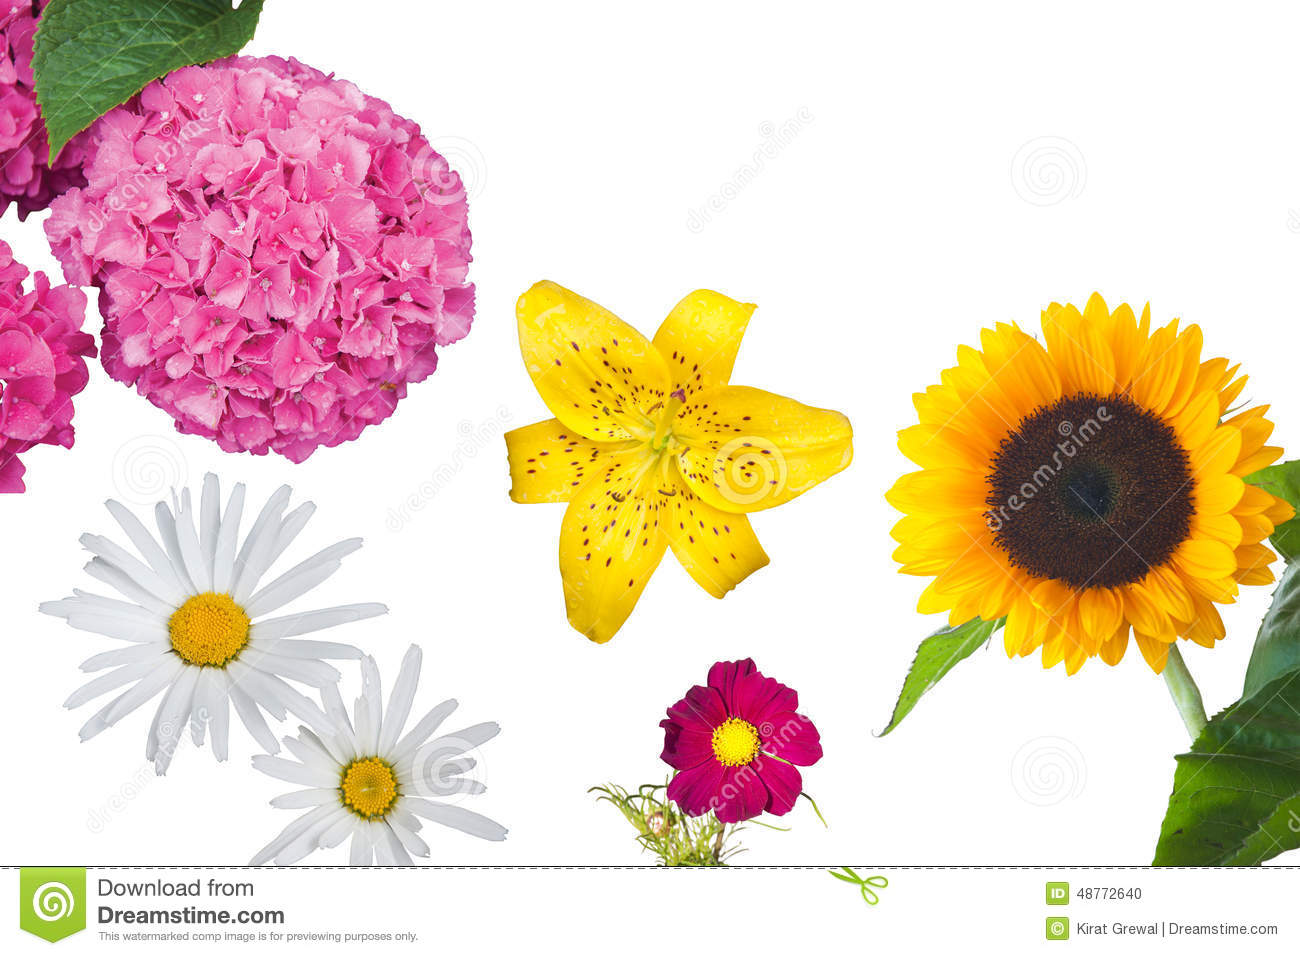 Hydrangea, Daisies, A Yellow Tiger Lily, A Magenta Anemone.